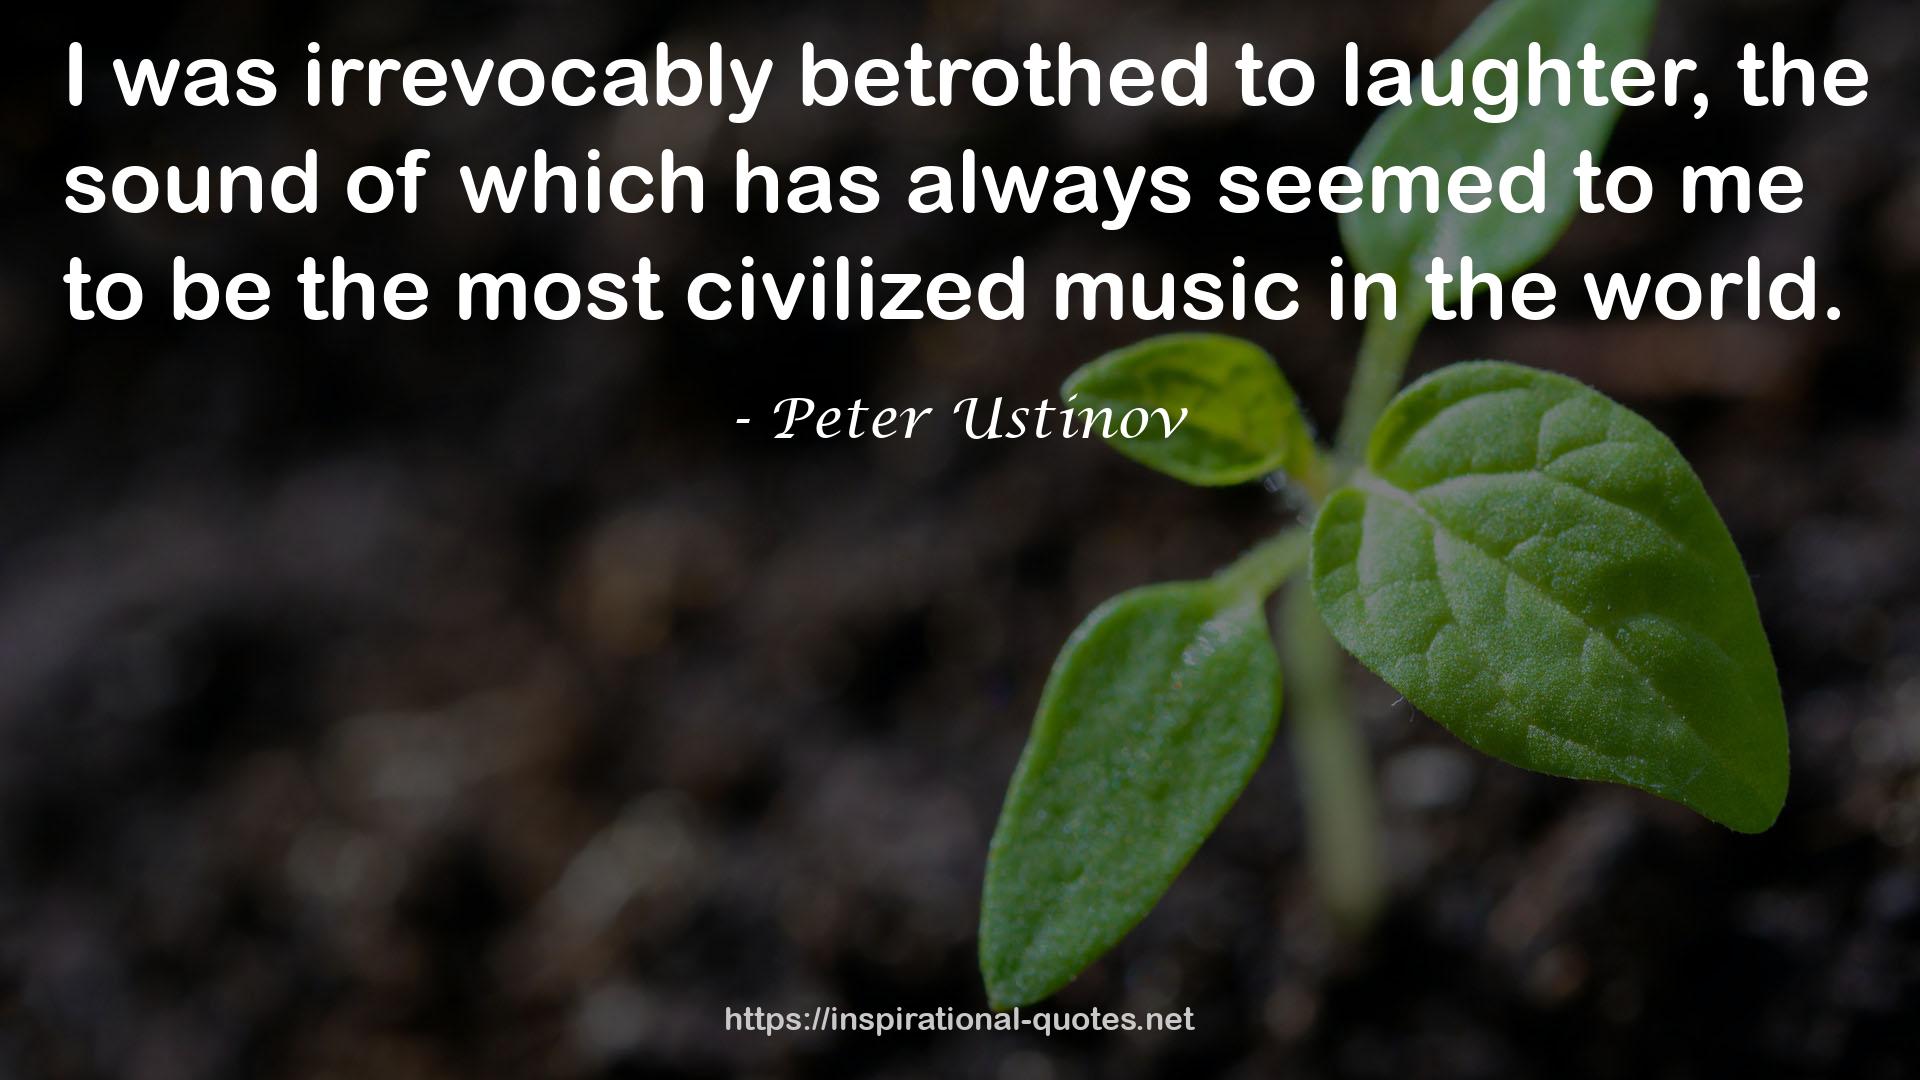 Peter Ustinov QUOTES